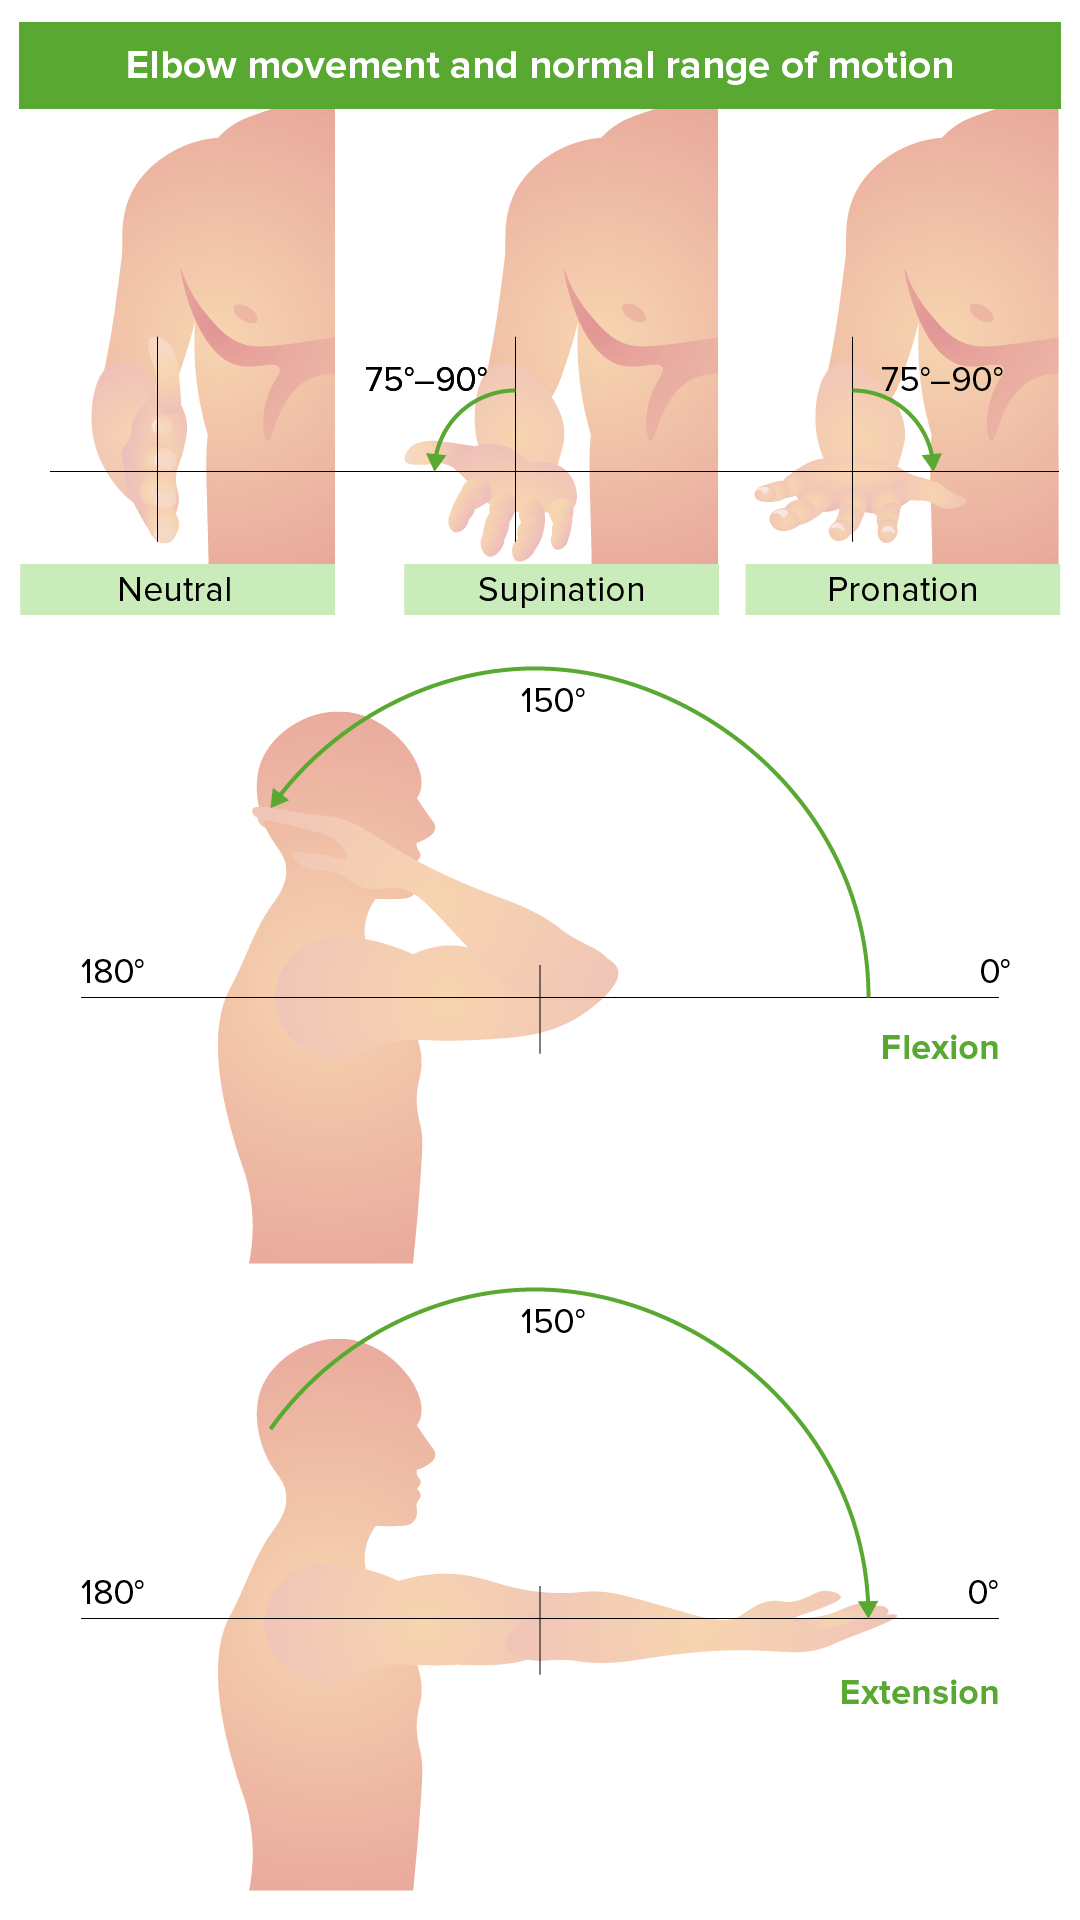 Elbow movement and normal range of motion